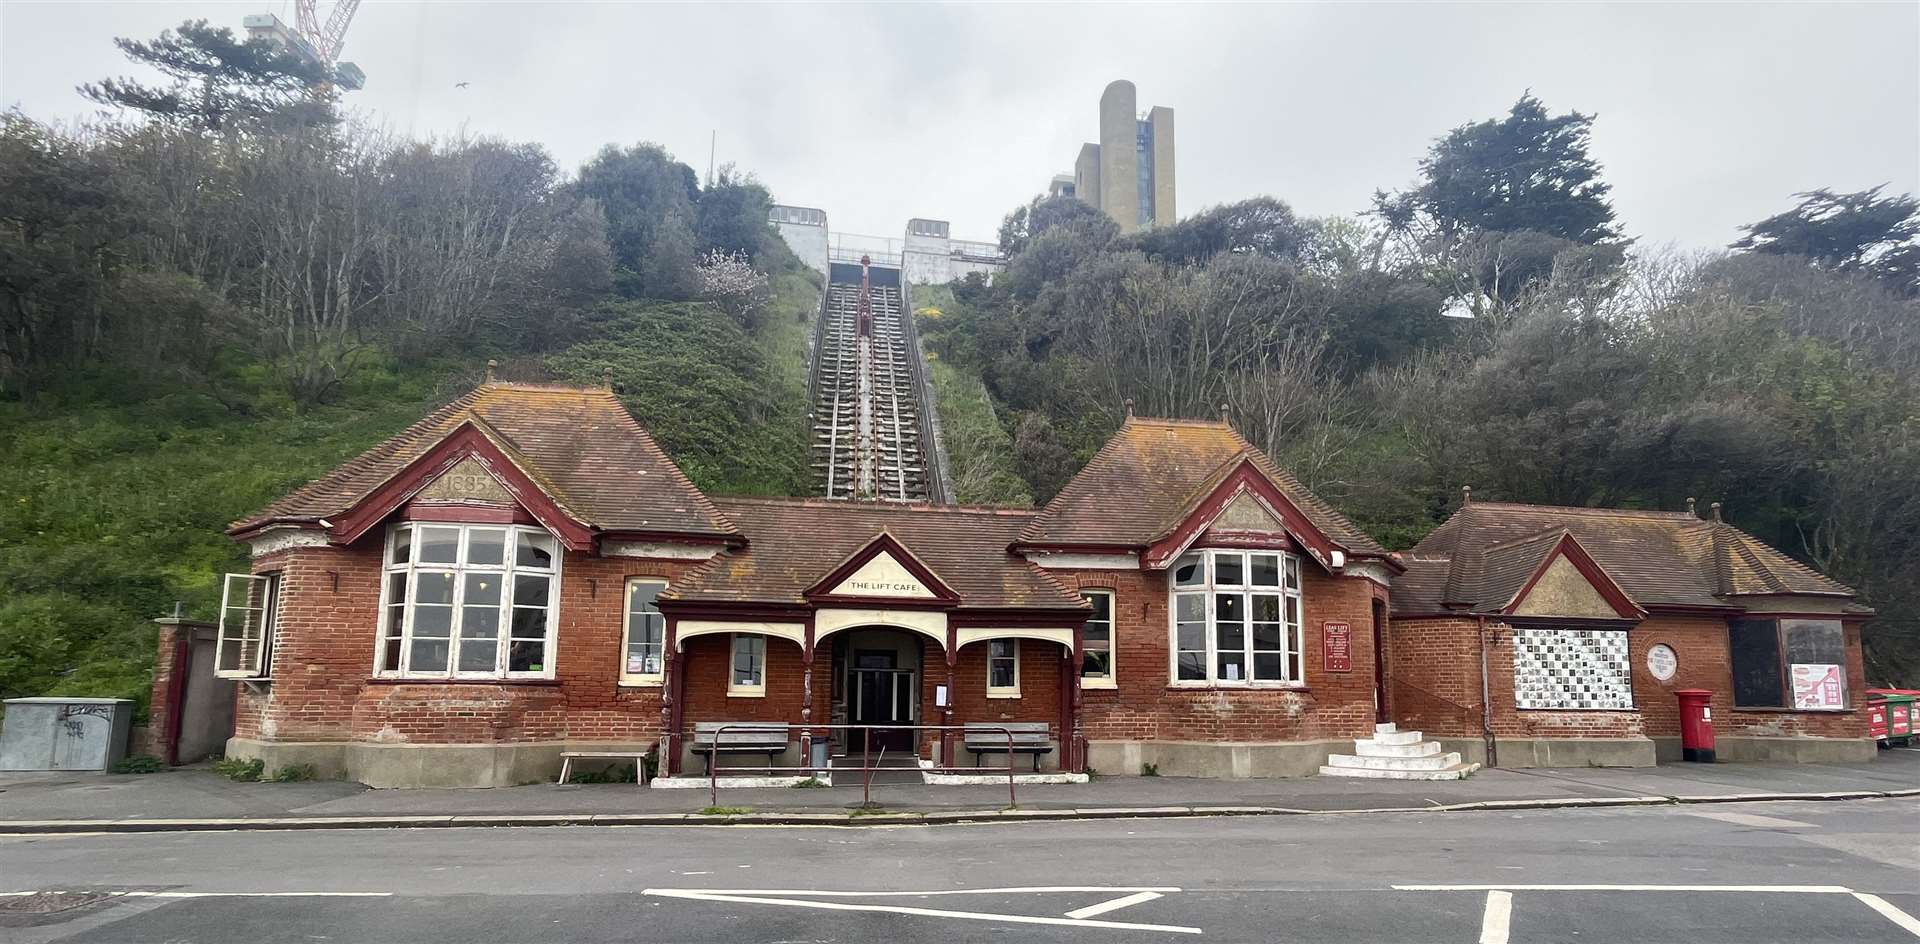 The £6.6 million restoration project to the Leas Lift in Folkestone is set to get underway this summer